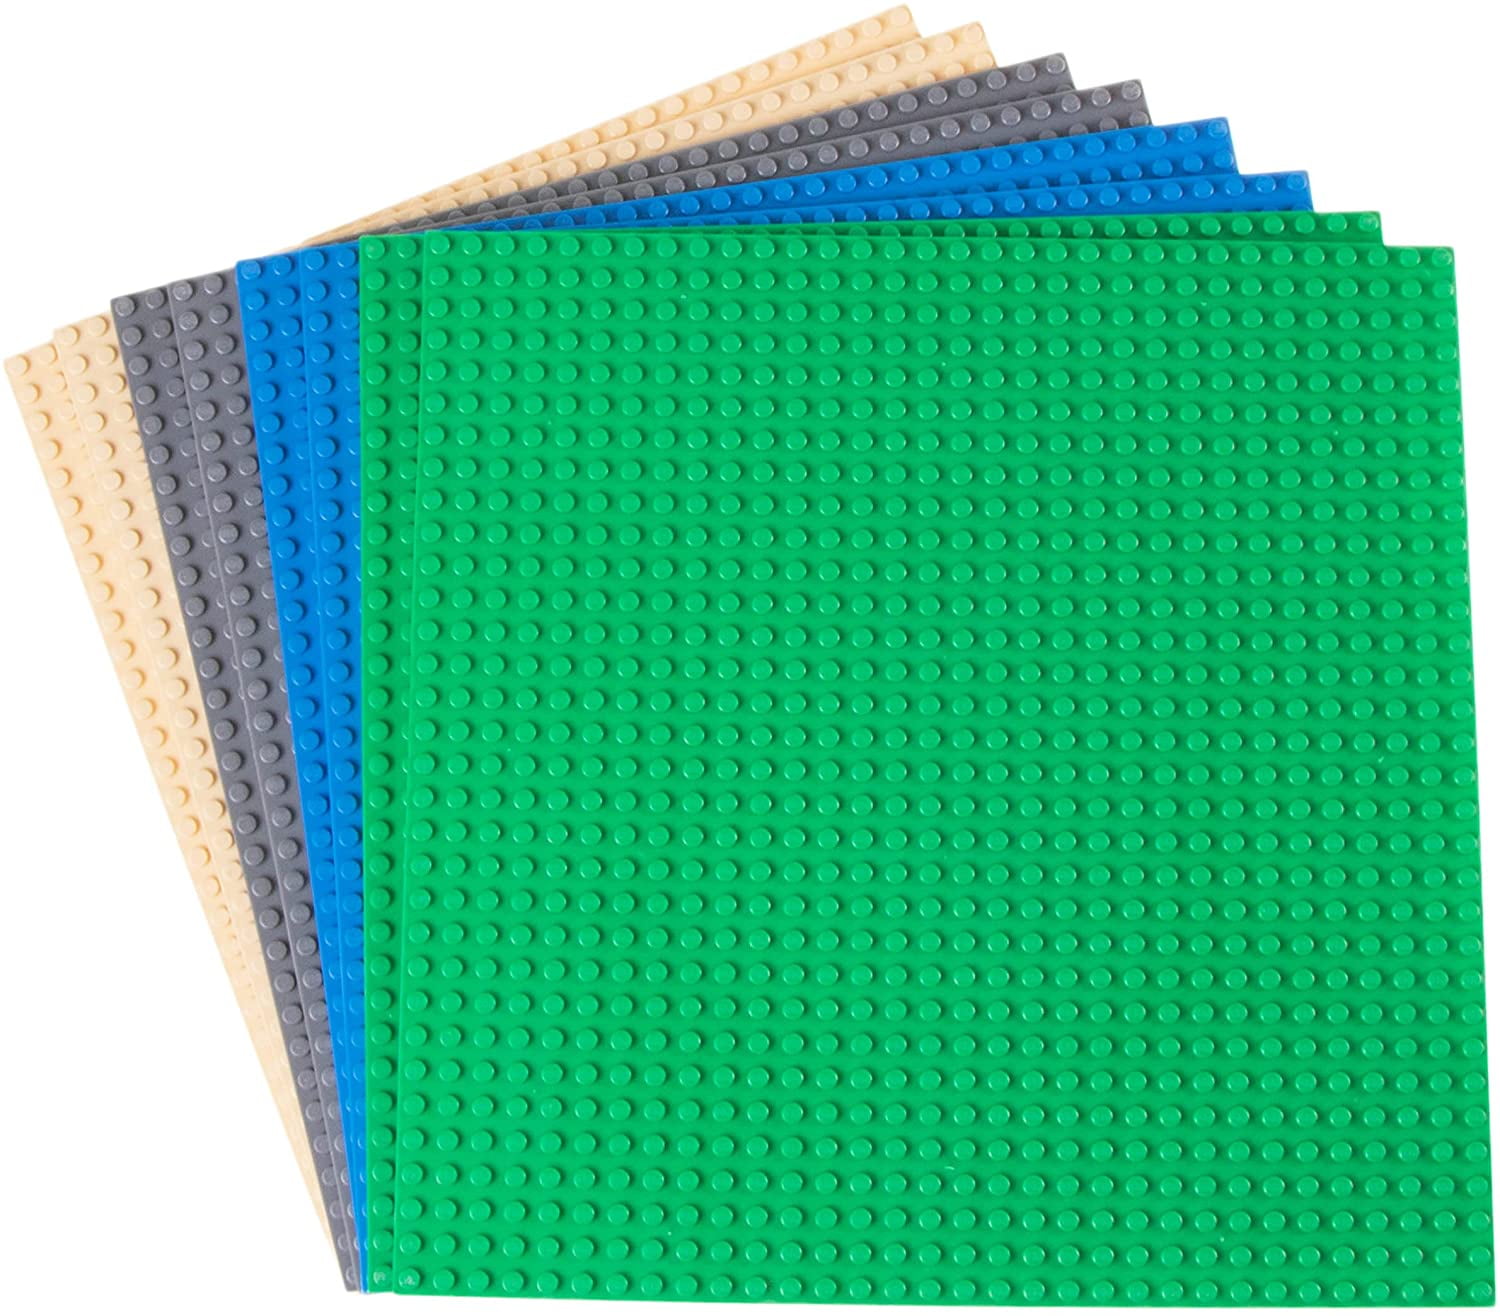 Twisted Uskyldig Thorns Strictly Briks Classic Stackable Baseplates - LEGO Compatible Base Plates -  Set of 8 in Blue, Green, Gray, and Sand - Walmart.com